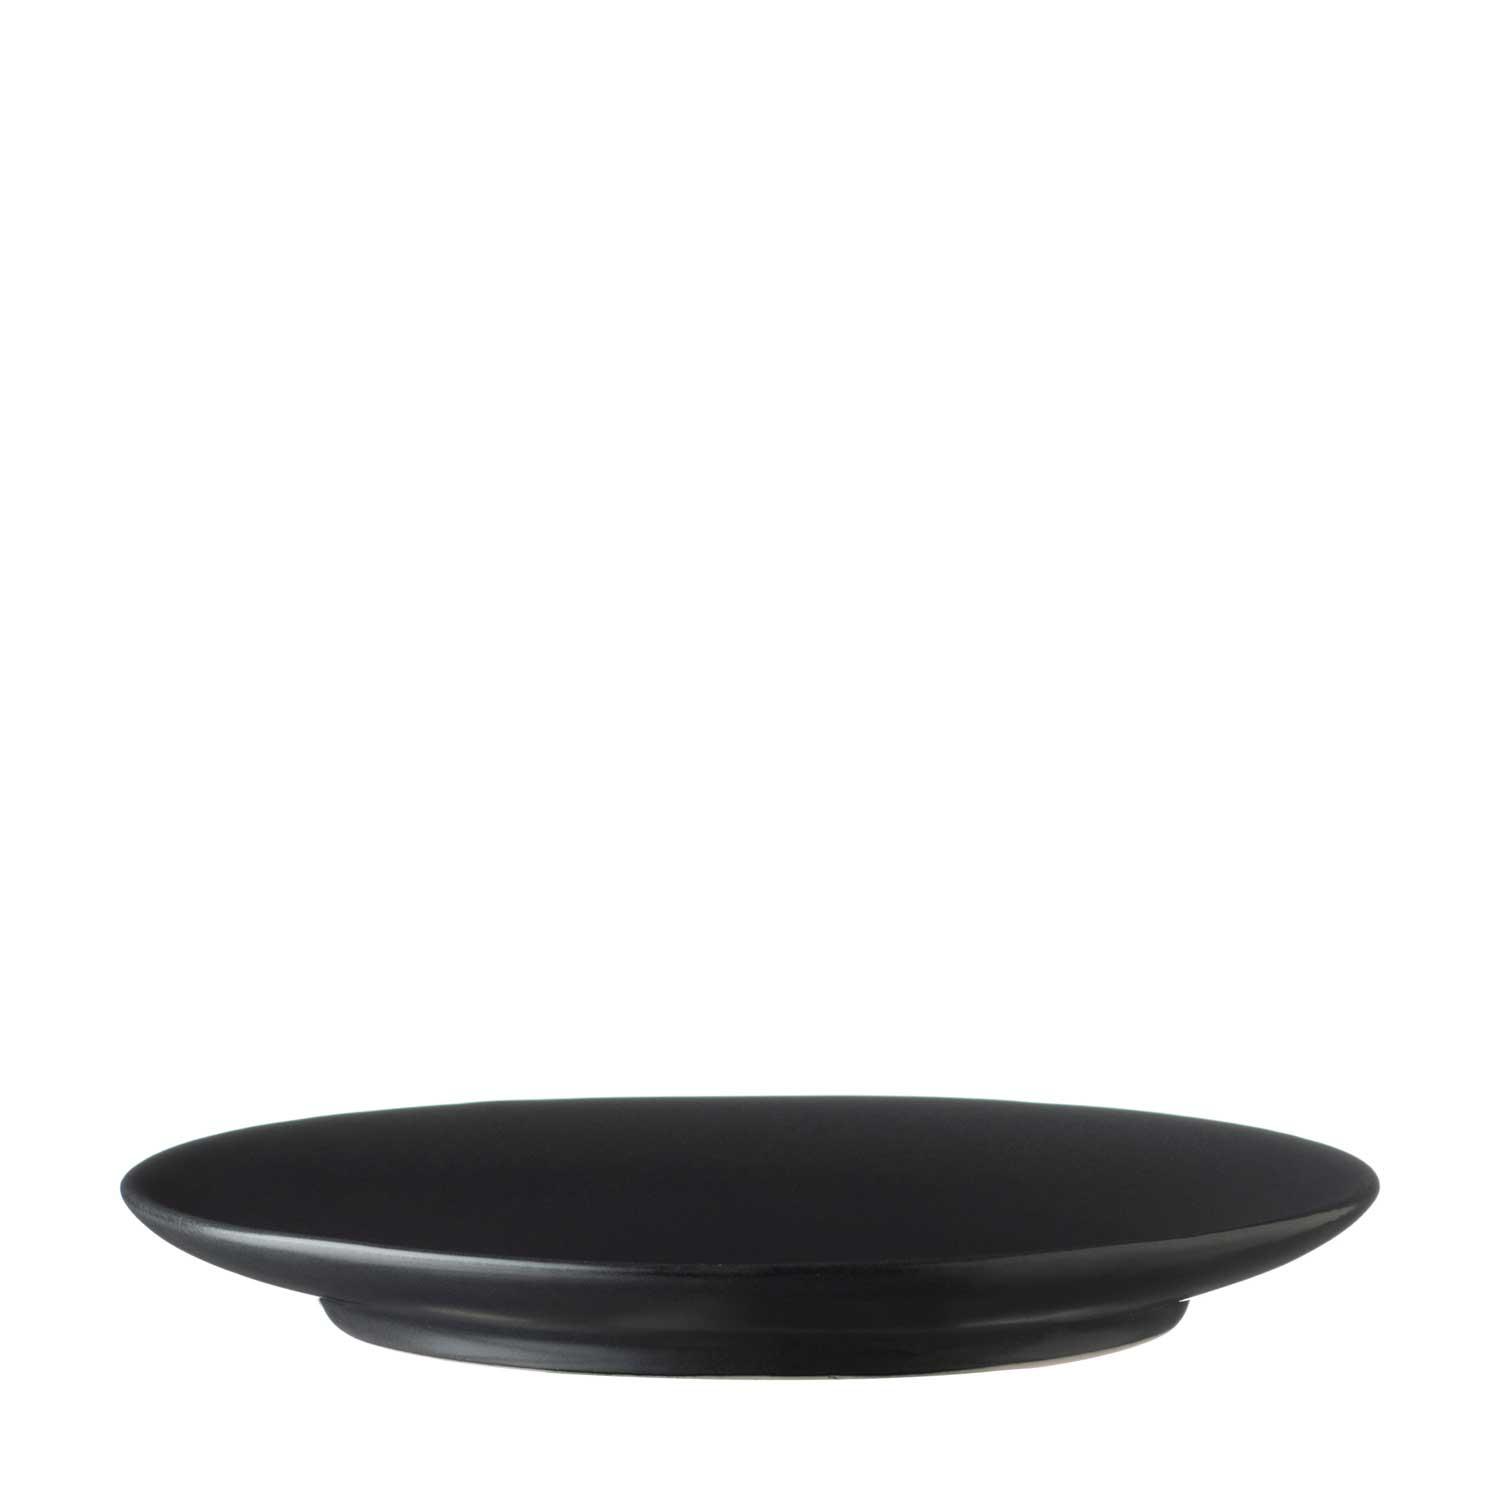 Classic Round Bread & Butter Plate Satin Charcoal Black - Jenggala